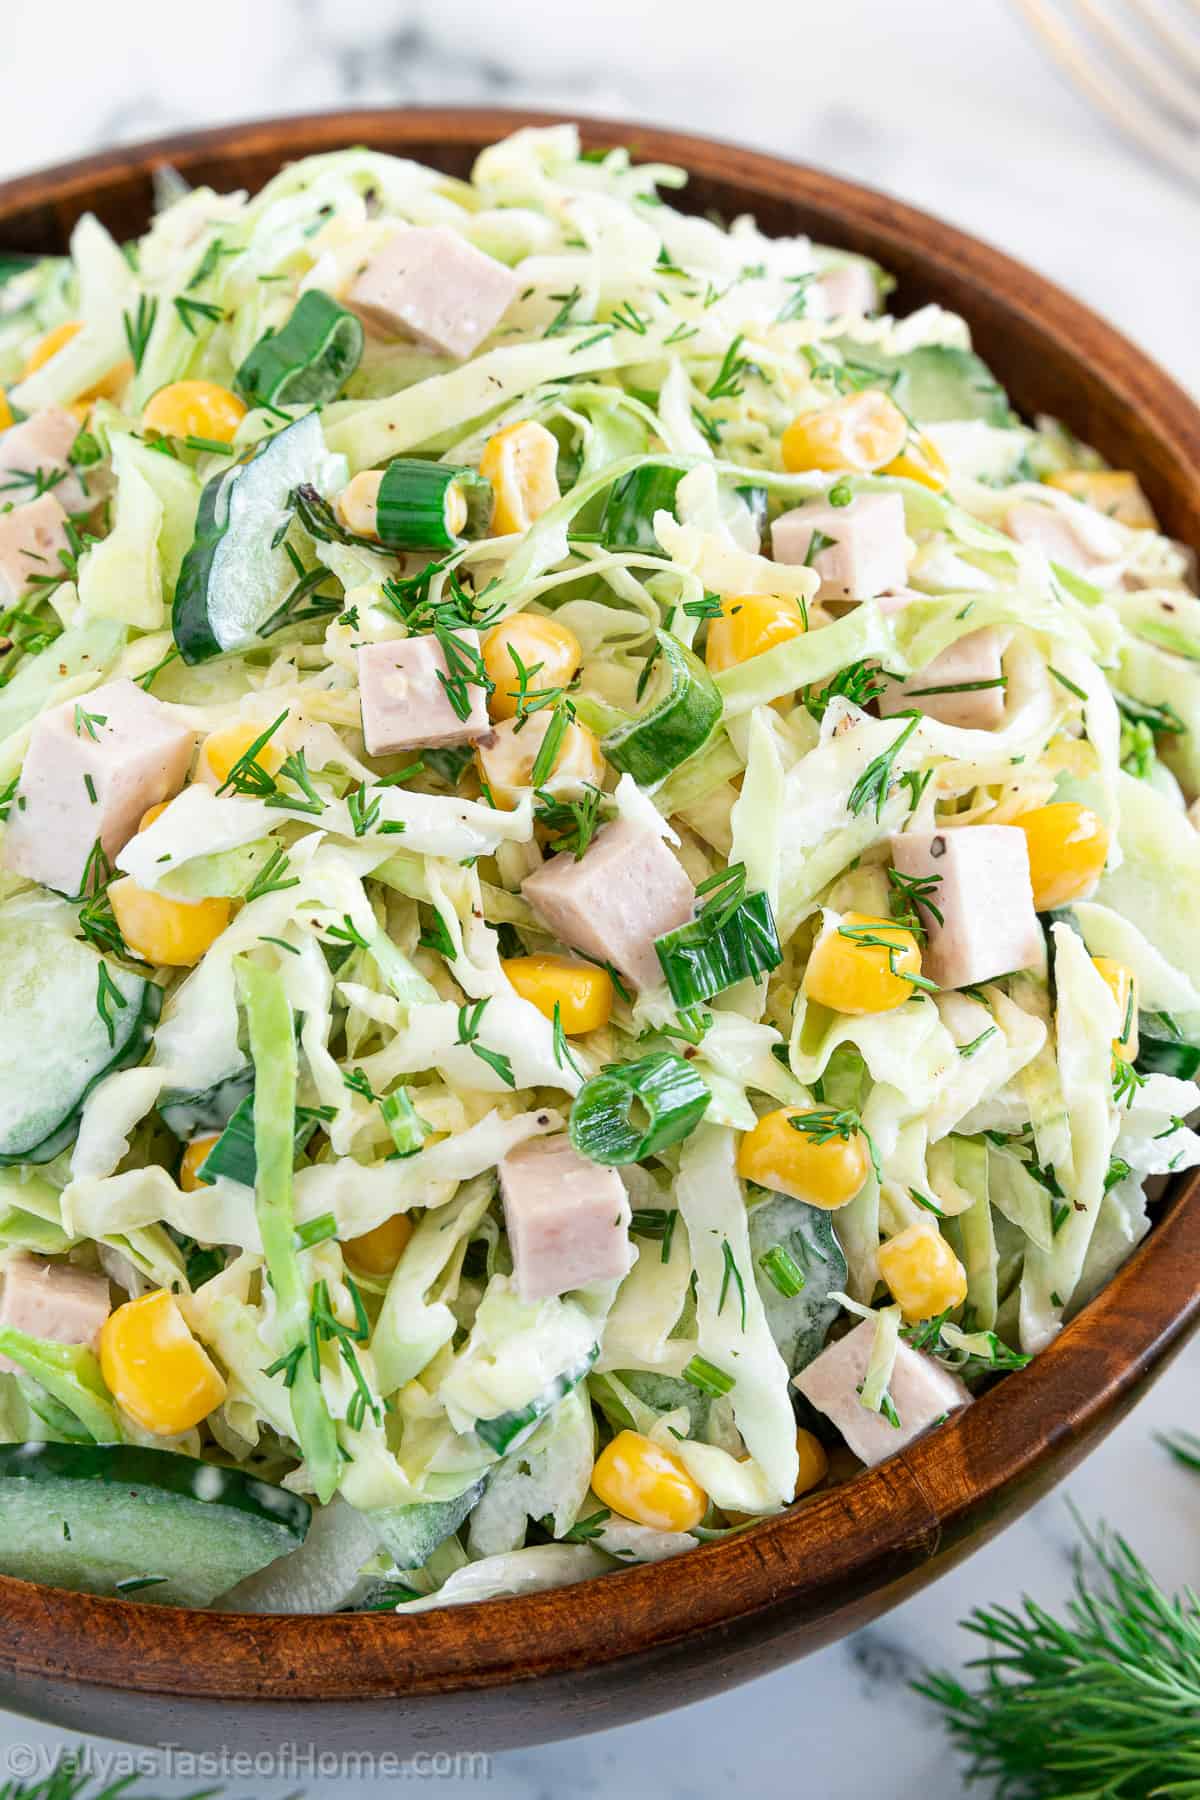 Salads made with cabbage tend to be my favorite. Crunchy cabbage, cucumbers, chives, and all the rest of the ingredients mixed with this brand of mayo, turn out into a perfectly tasty salad.